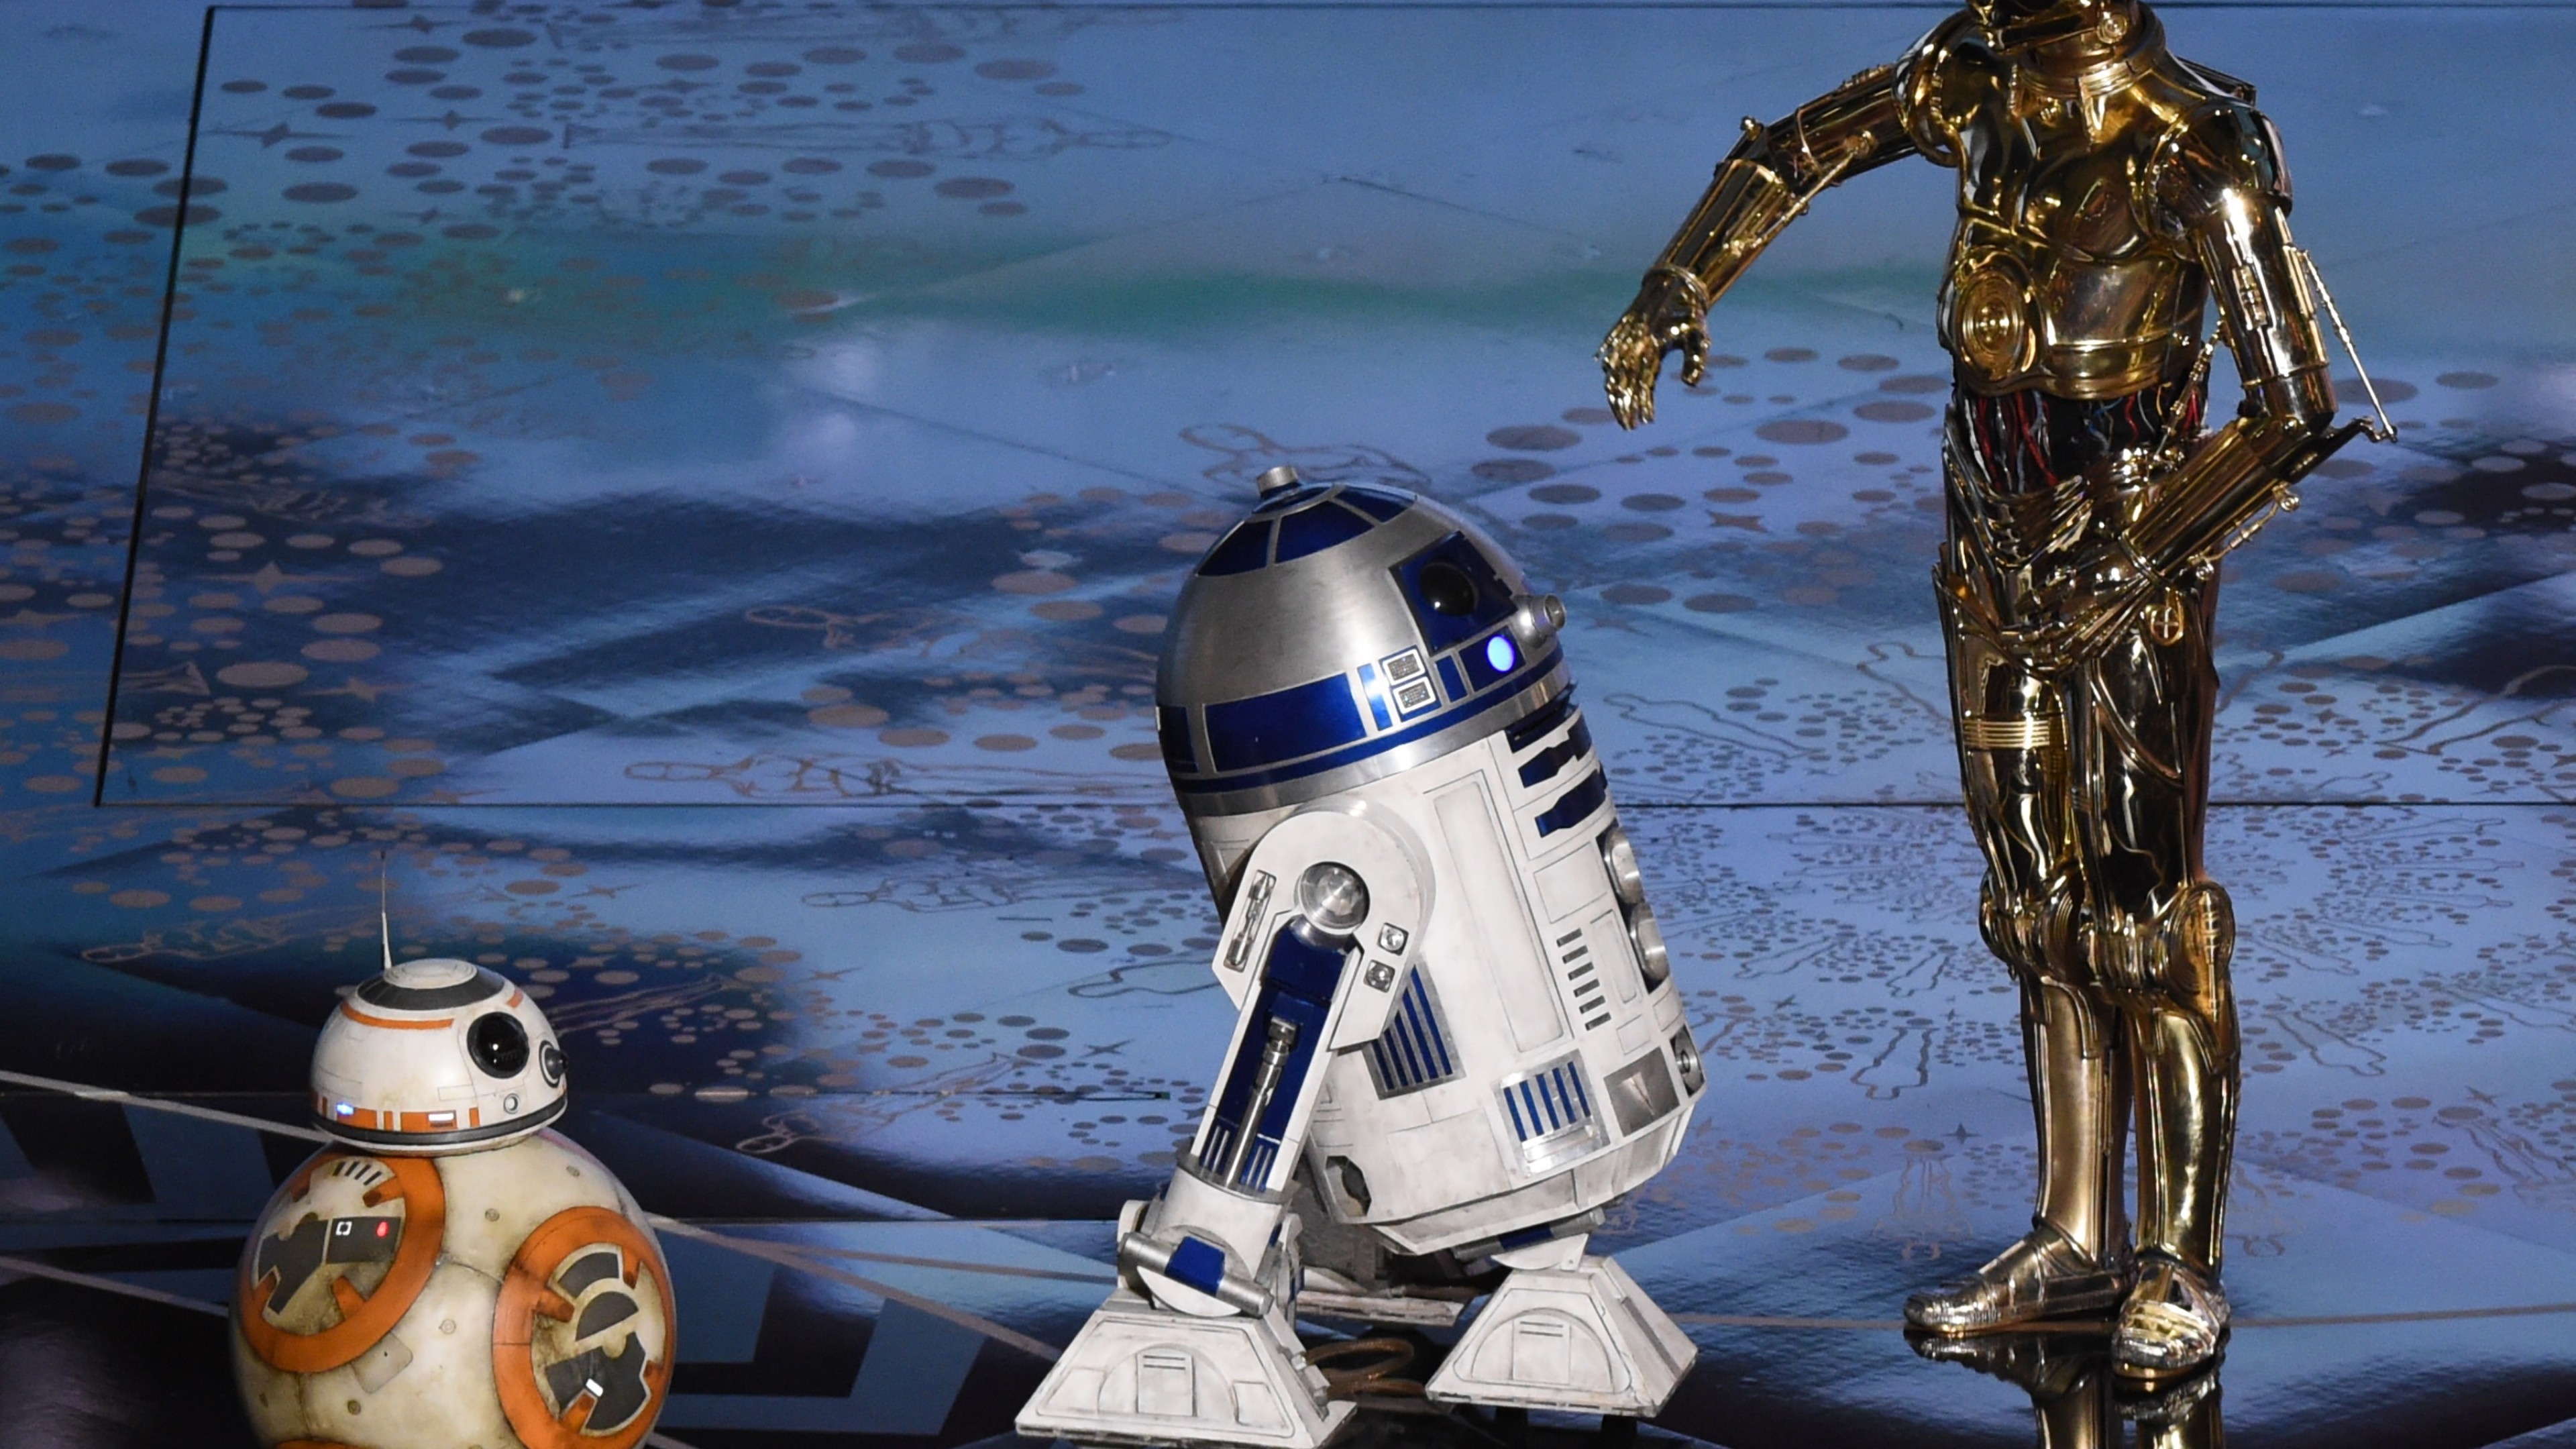 C3po And R2d2 Wallpaper R2d2 8 C3po Hd Wallpaper Backgrounds Download